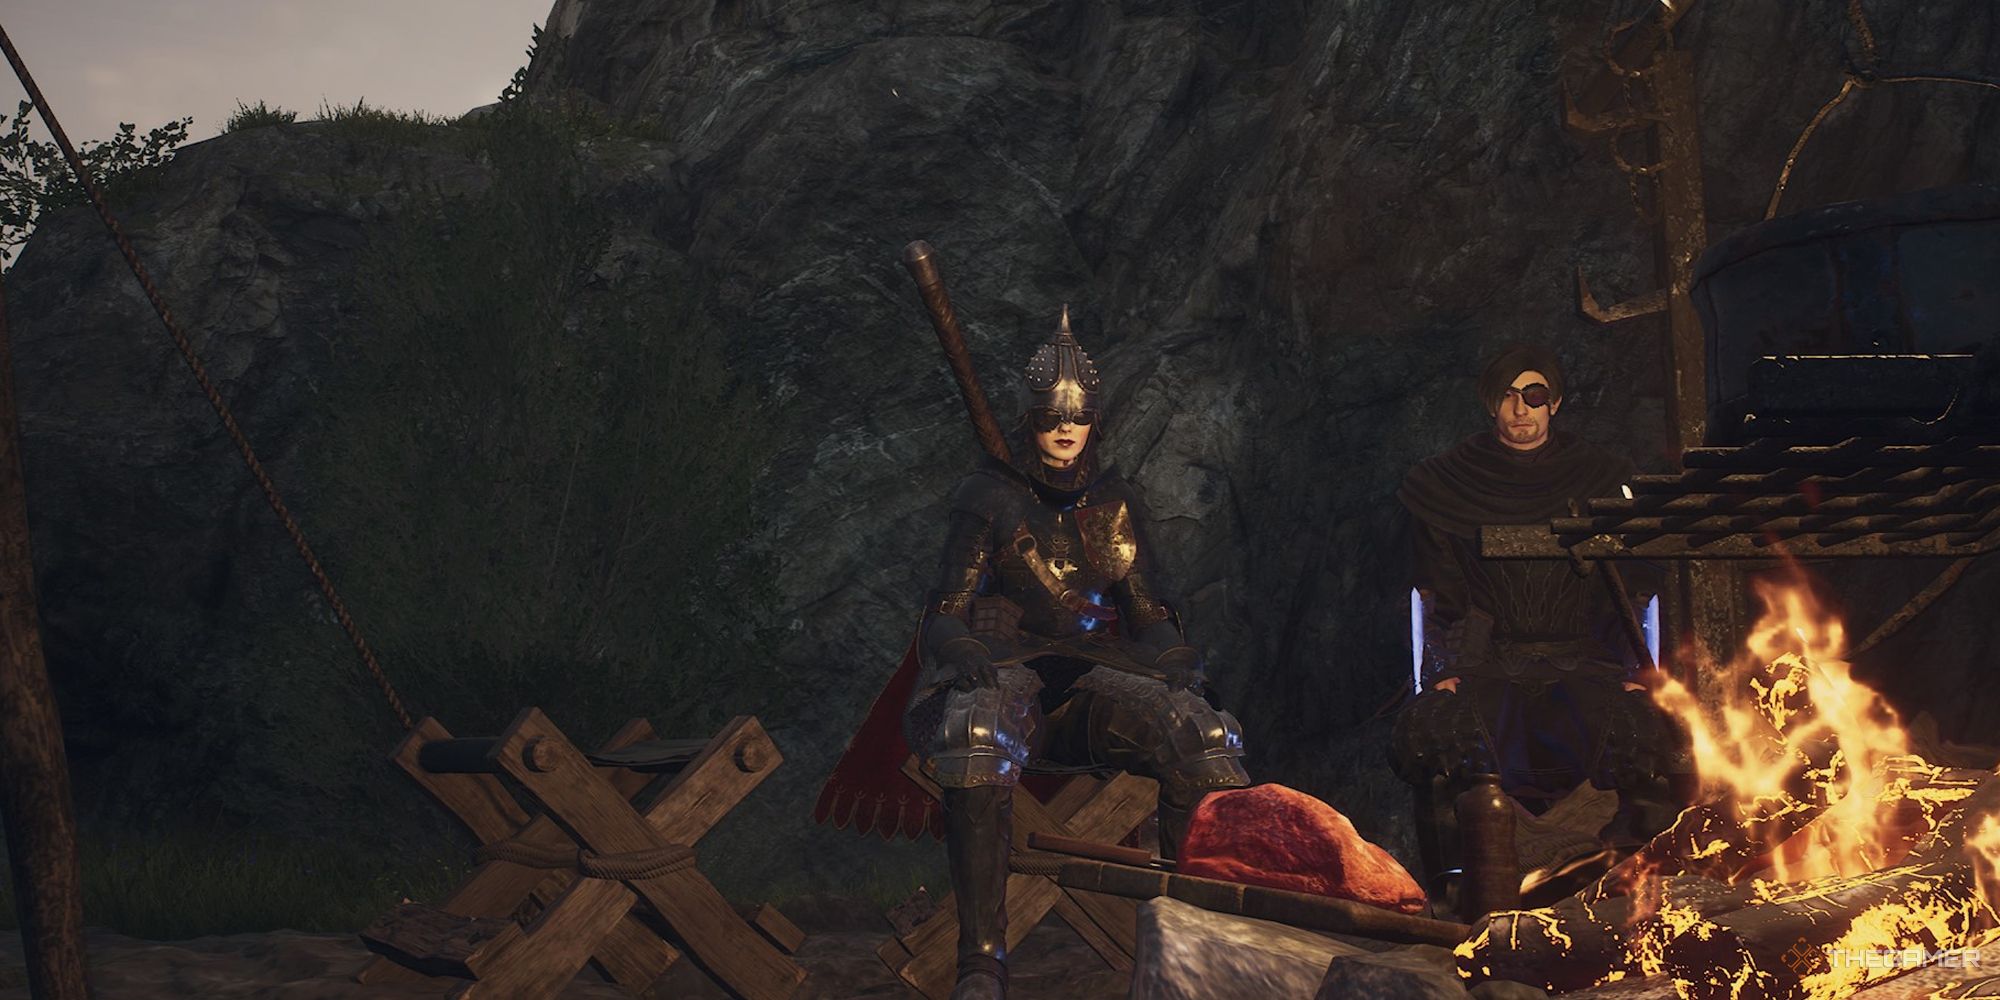 An Arisen and their pawn sat beside a campfire with meat in Dragon's Dogma 2.